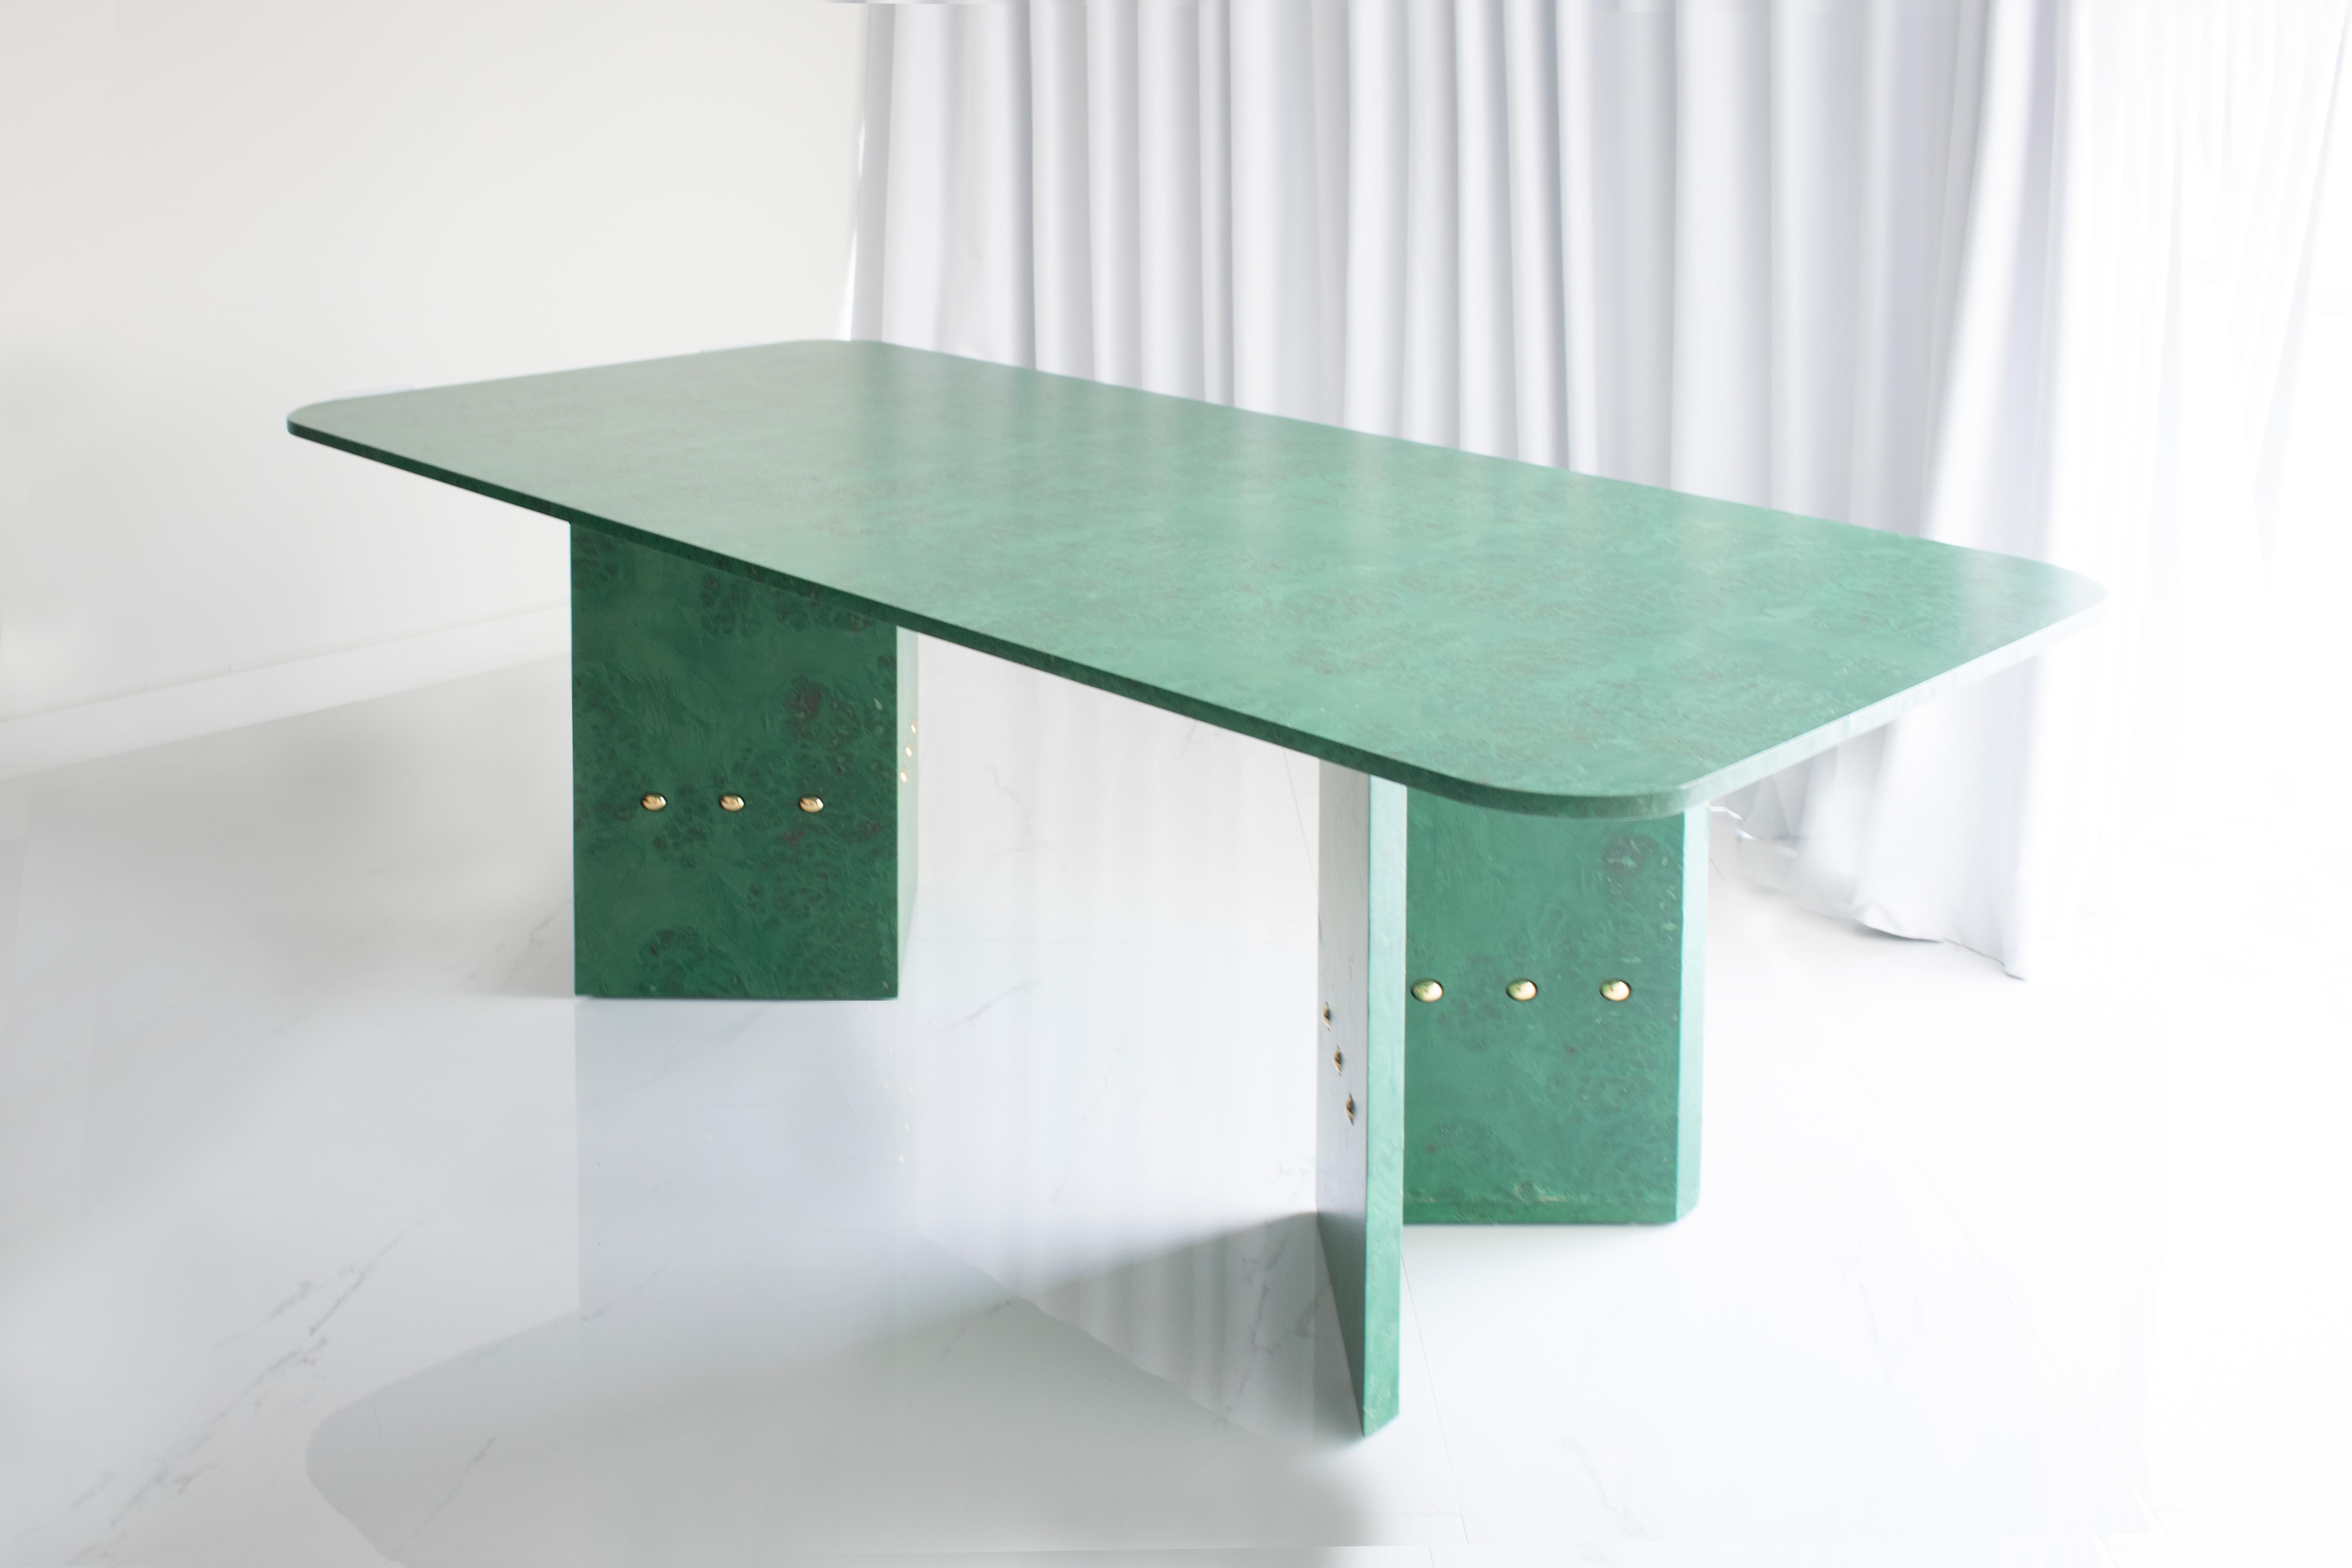 Made of Burl Veneer lacquered in green, with solid Brass details, this dining piece is a bold chromatic statement conceived with fine detailing. Its timeless design brings a piece of nature to the living space and its vast statement green wooden